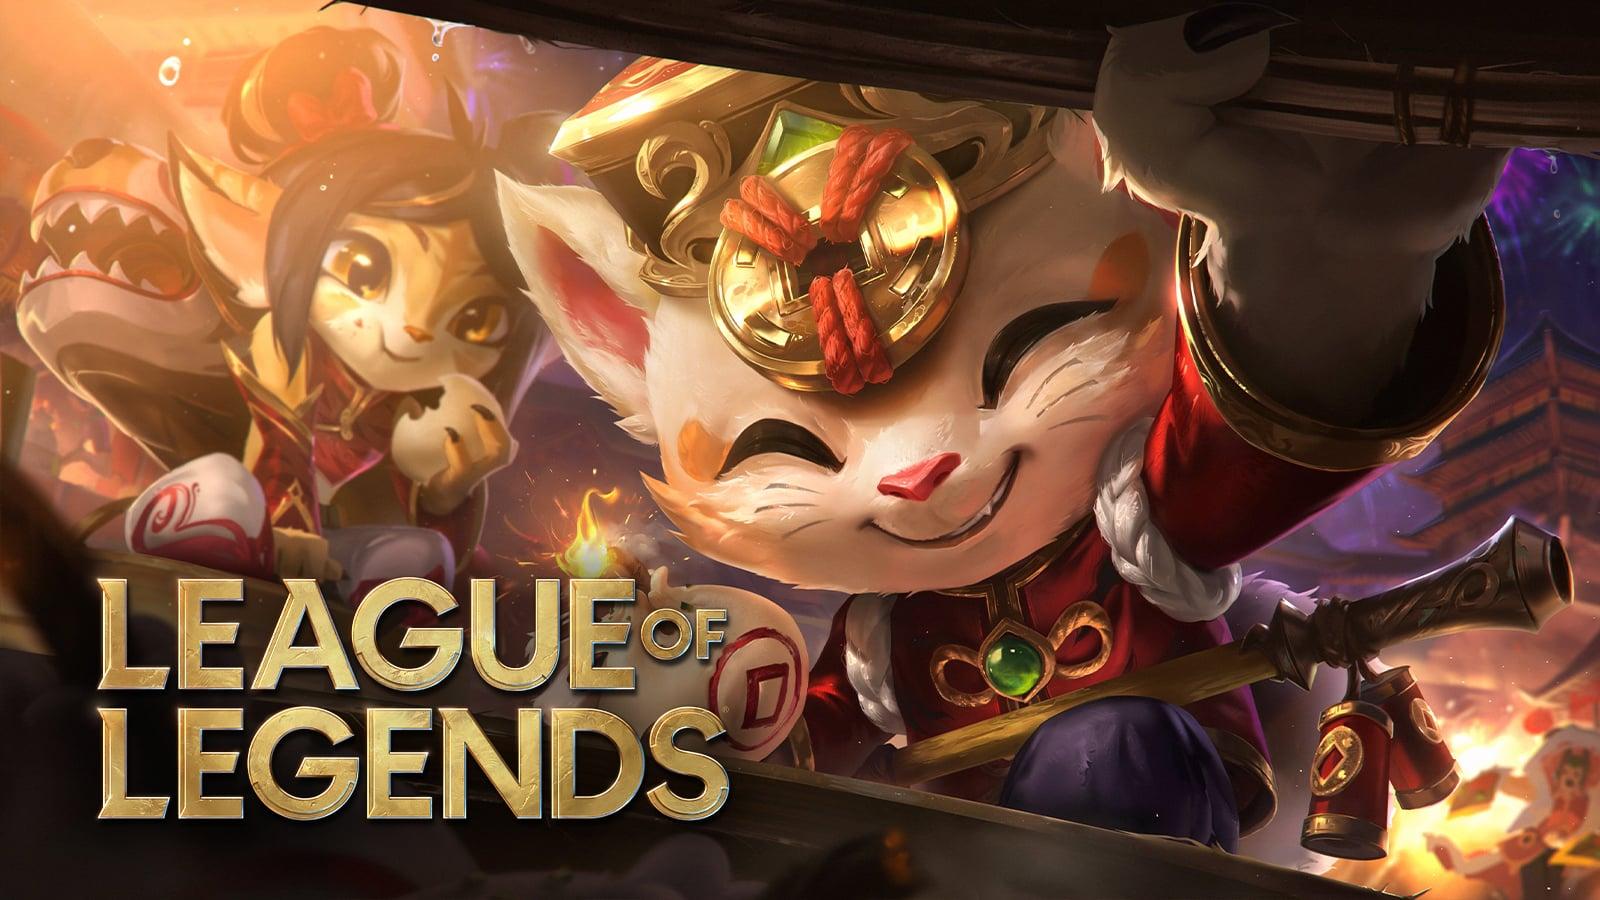 Lunar Revel League of Legends skins finally available in the